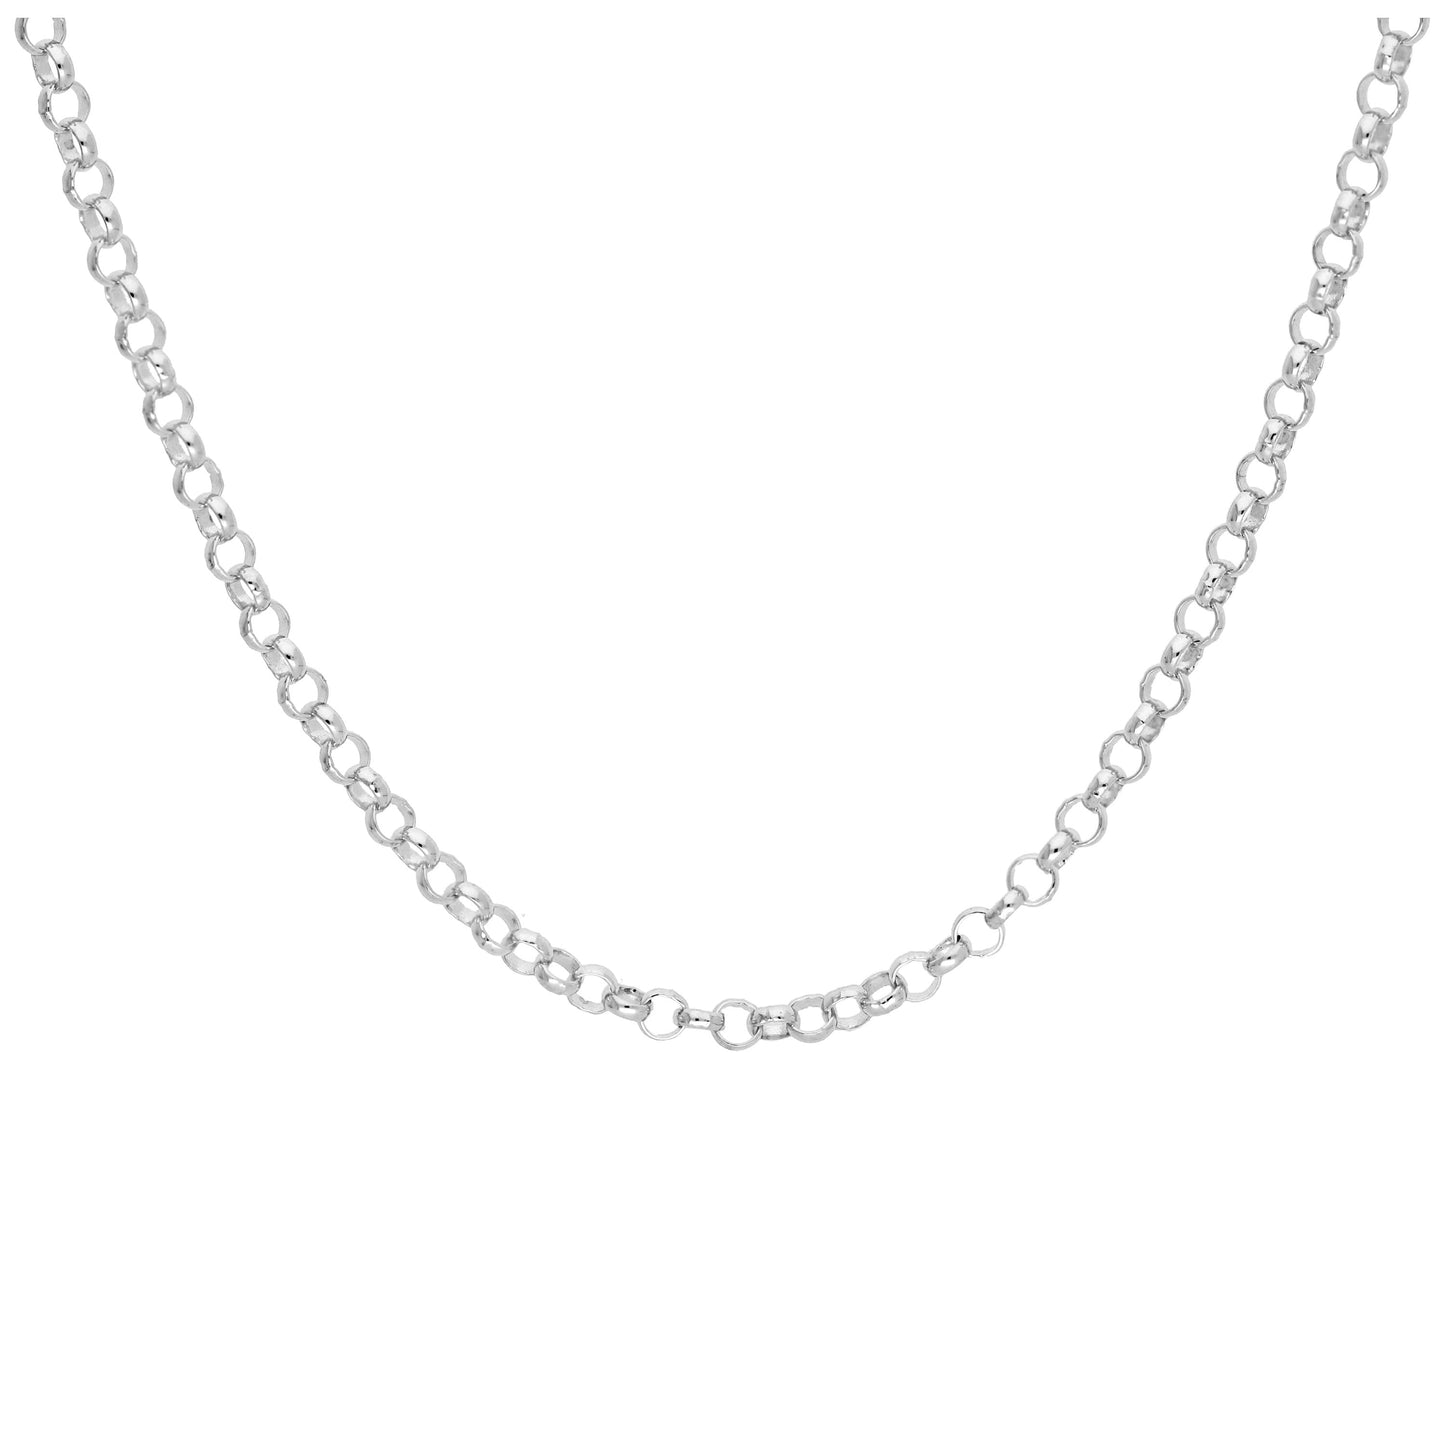 Sterling Silver Rolo Link Chain Necklace 18 Inches